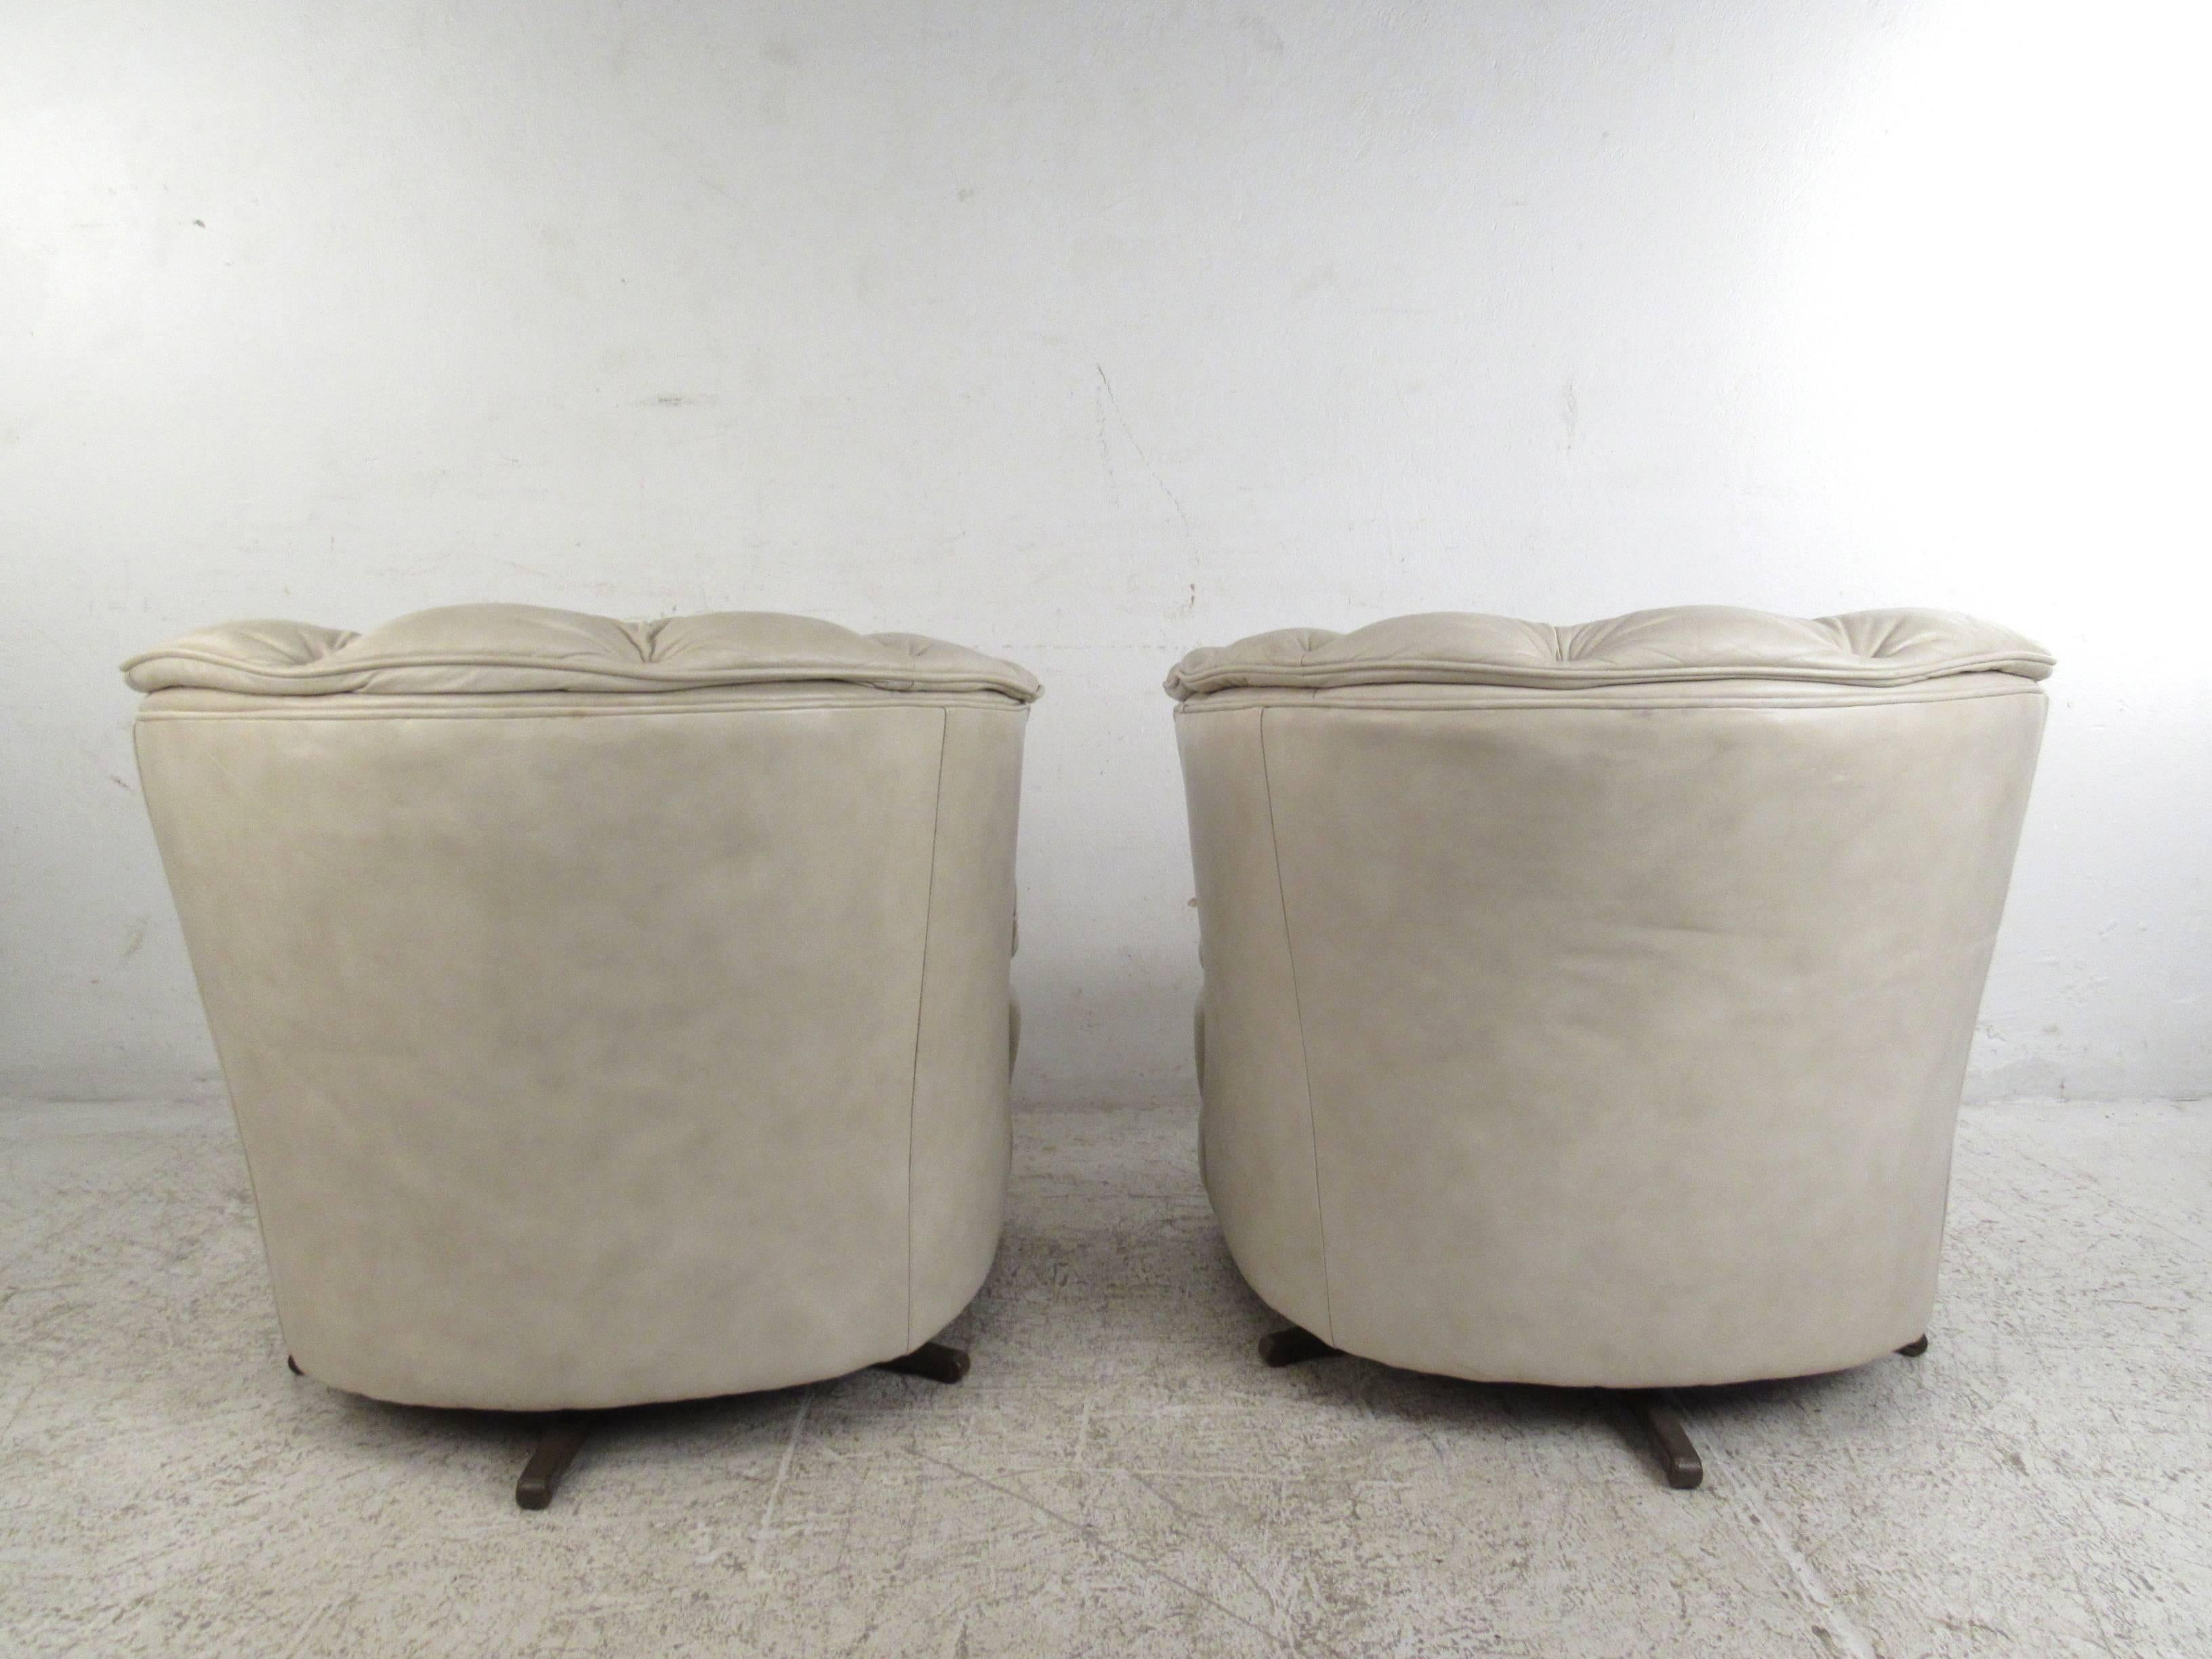 Pair of Vintage Tufted Leather Swivel Lounge Chairs, Mid-Century Modern 1